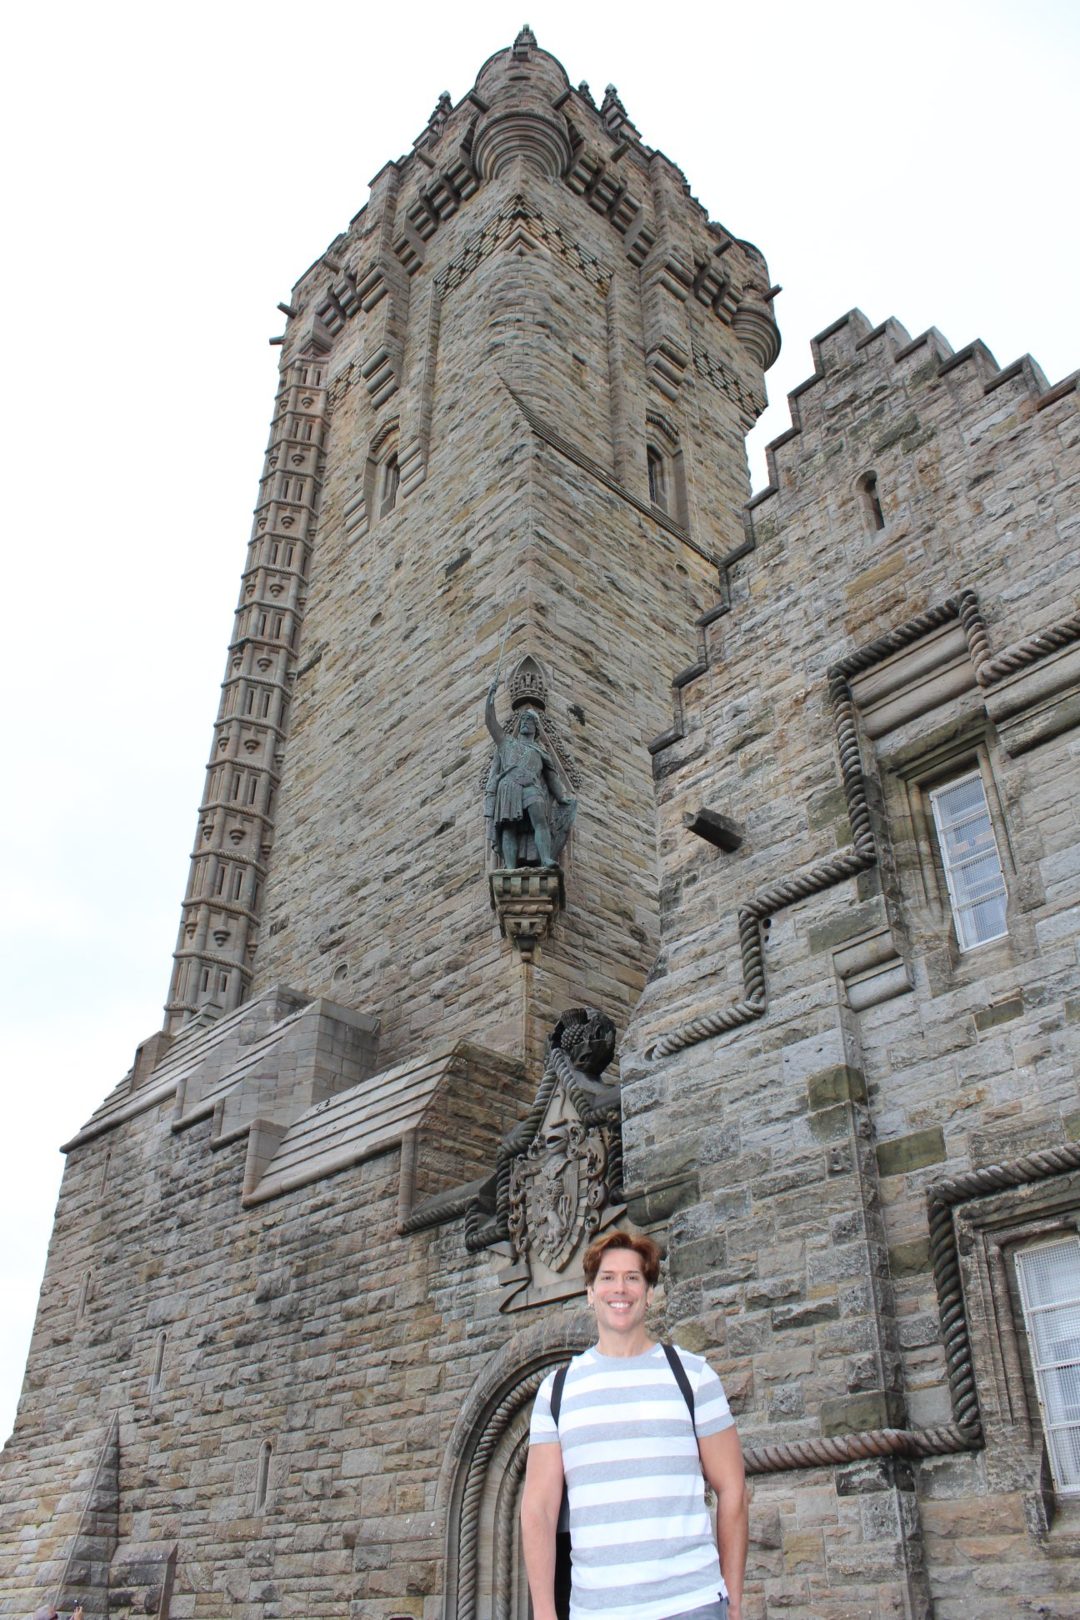 Monumento a William Wallace (Brave Heart)